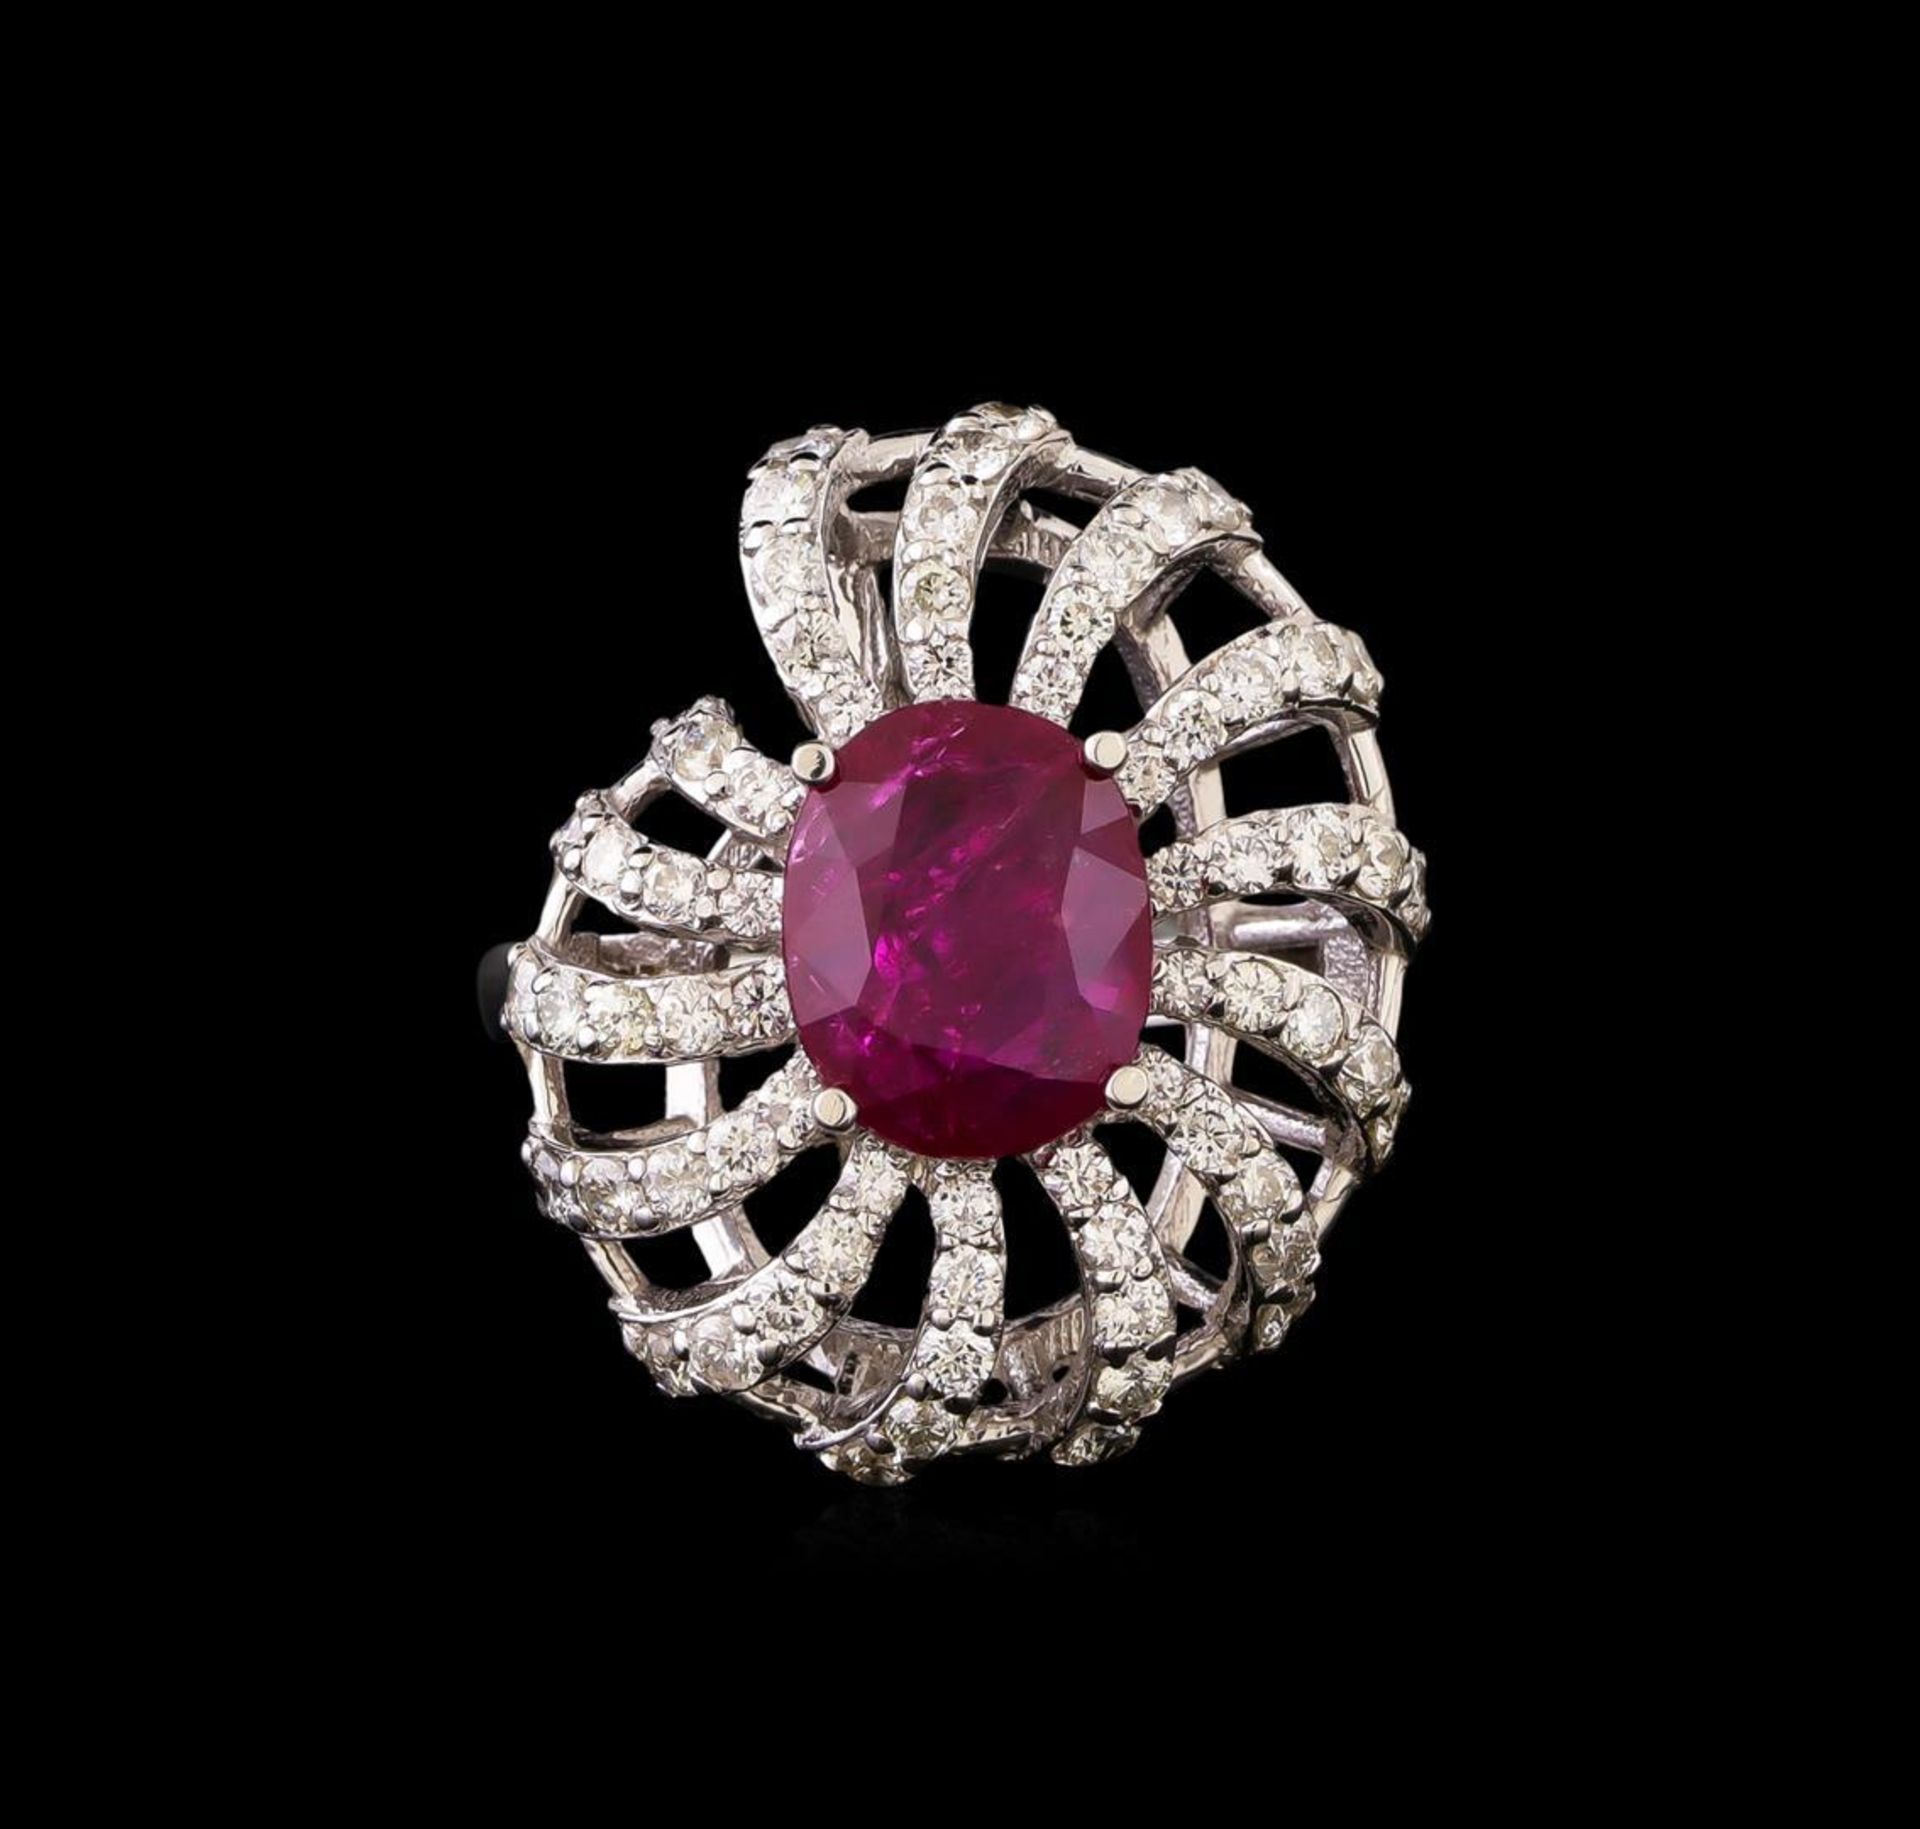 GIA Cert 2.99 ctw Ruby and Diamond Ring - 14KT White Gold - Image 2 of 7